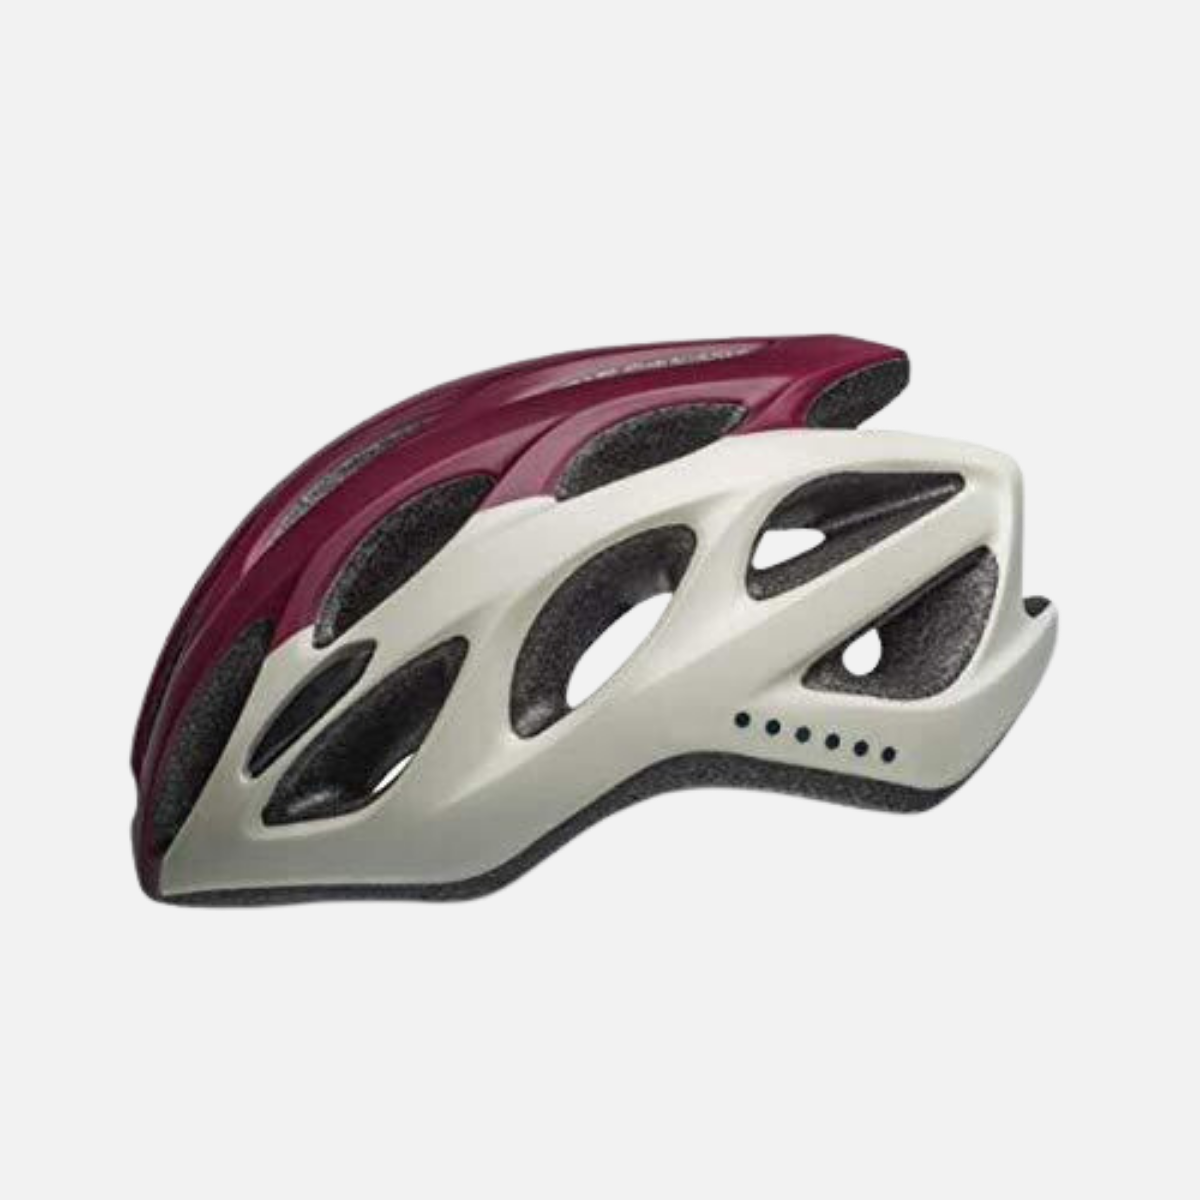 Bell Women's Tempo bicycle helmet / size 50-57